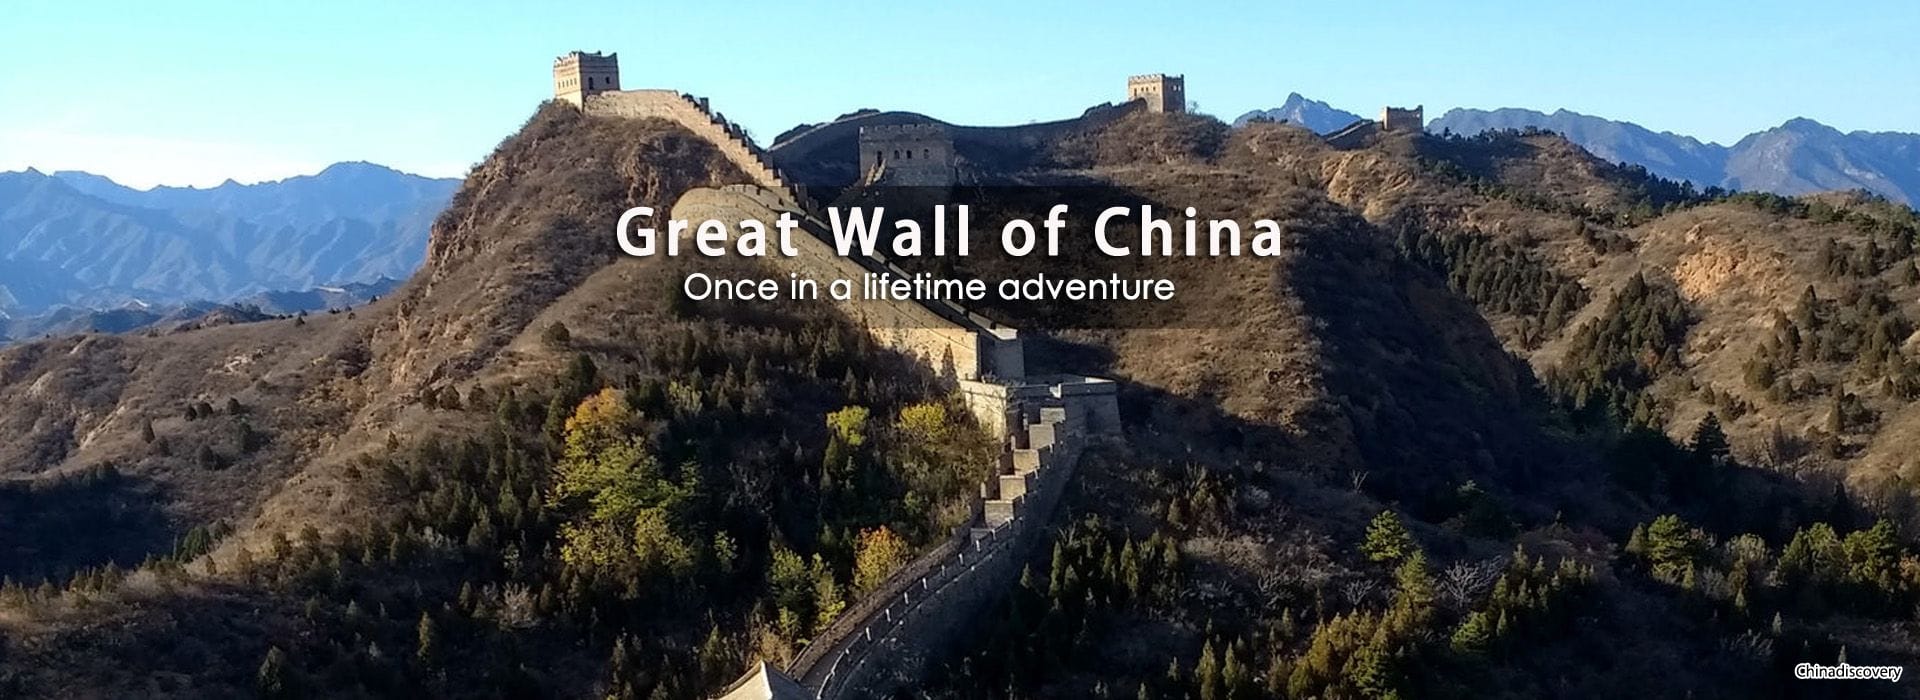 travel china guide great wall